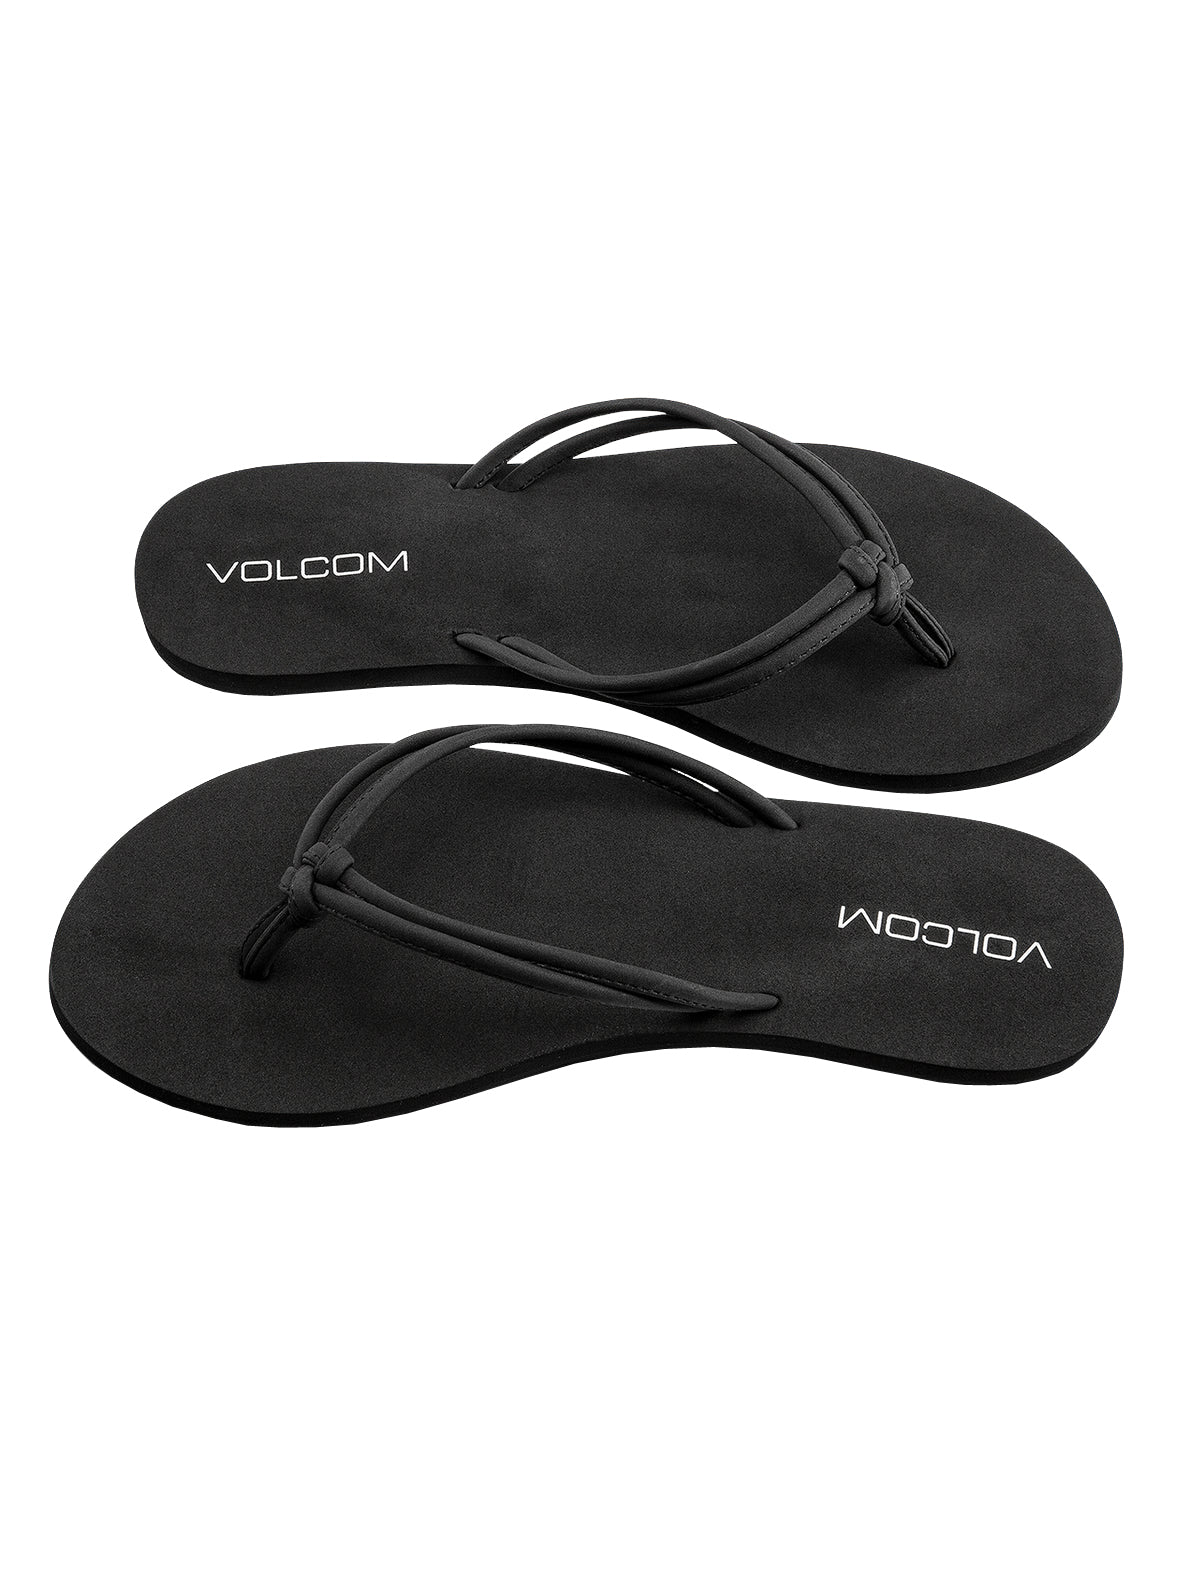 Volcom Forever and Ever 2 Womens Sandal BKO23-Black Out 6